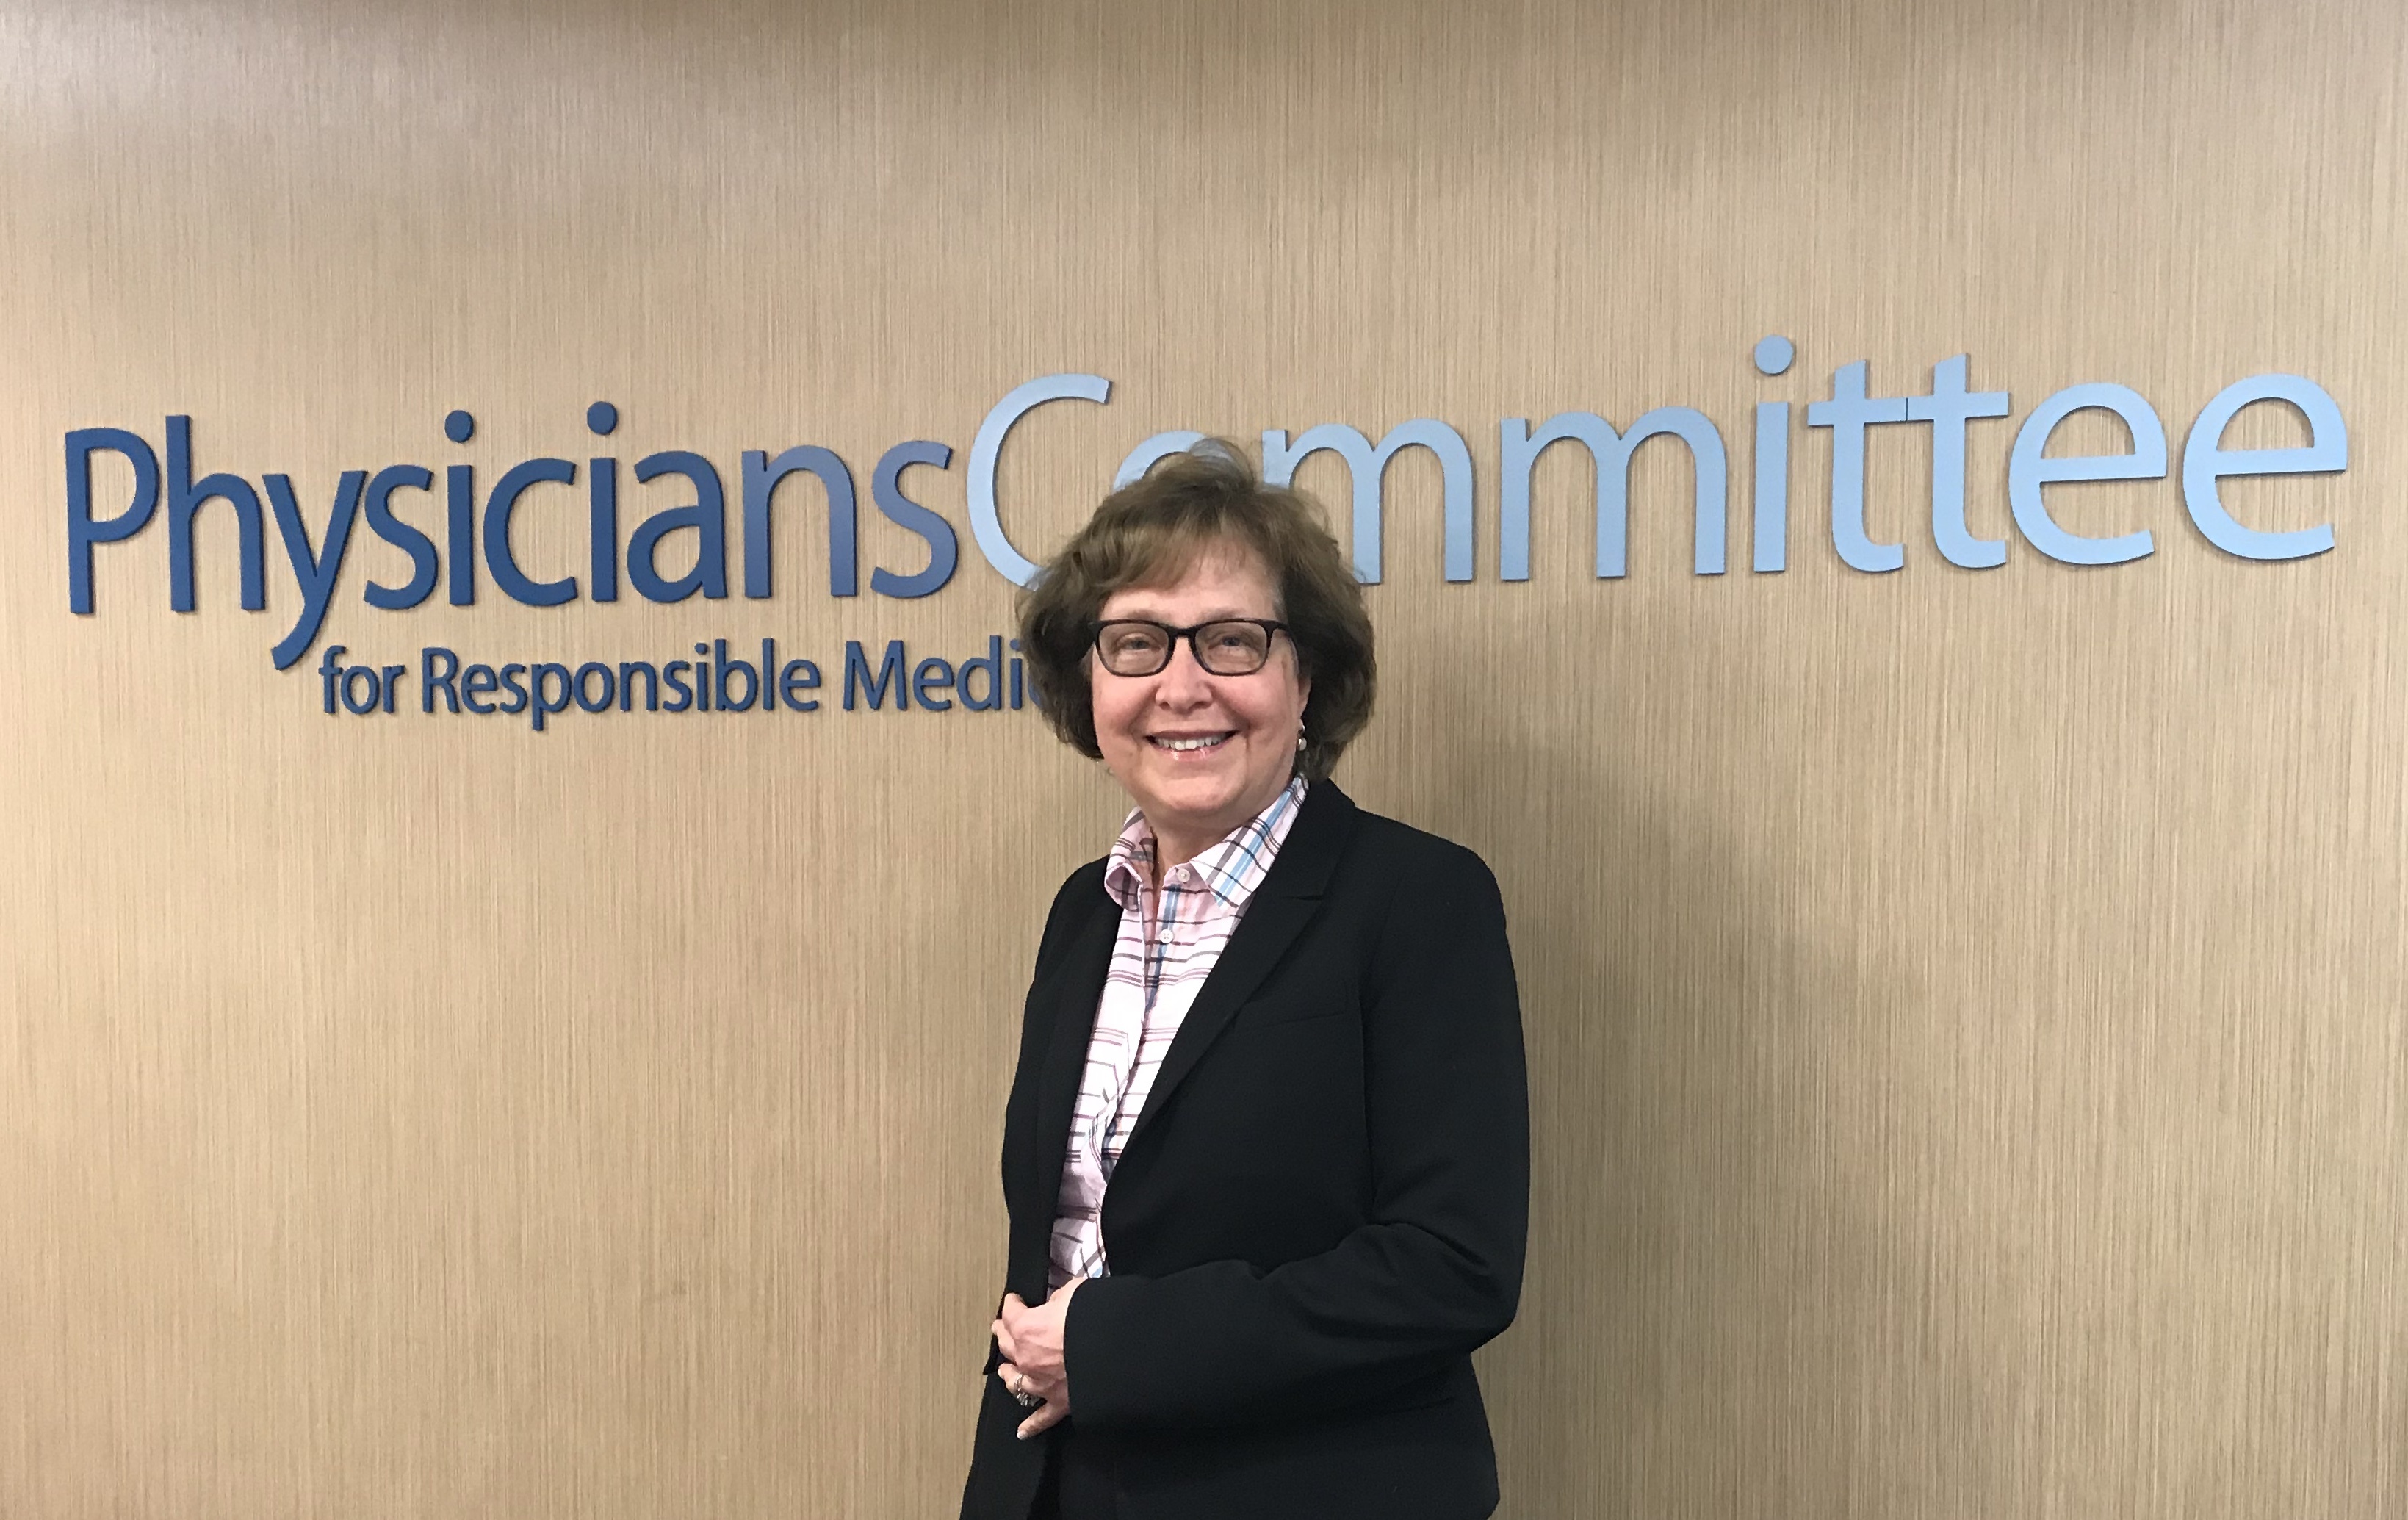 Betty Mizek at Physicians Committee for Responsible Medicine where she learned about plant-based diet that has so improved her health